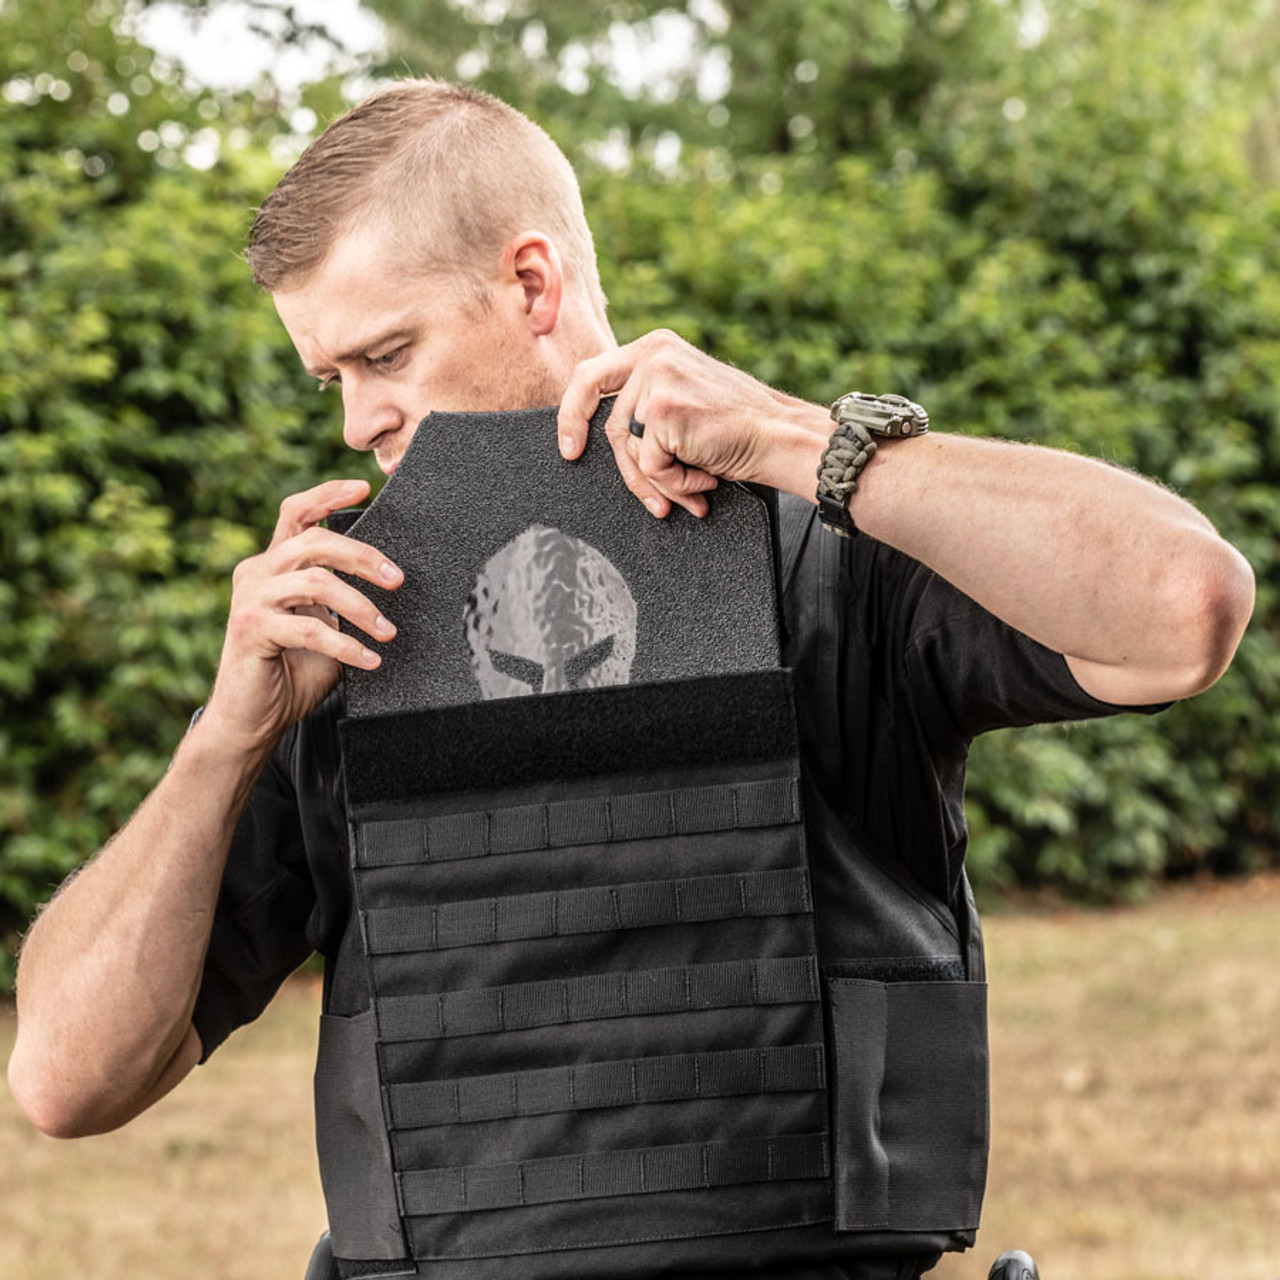 Spartan Armor Systems Tactical Level IIIA Certified Wraparound